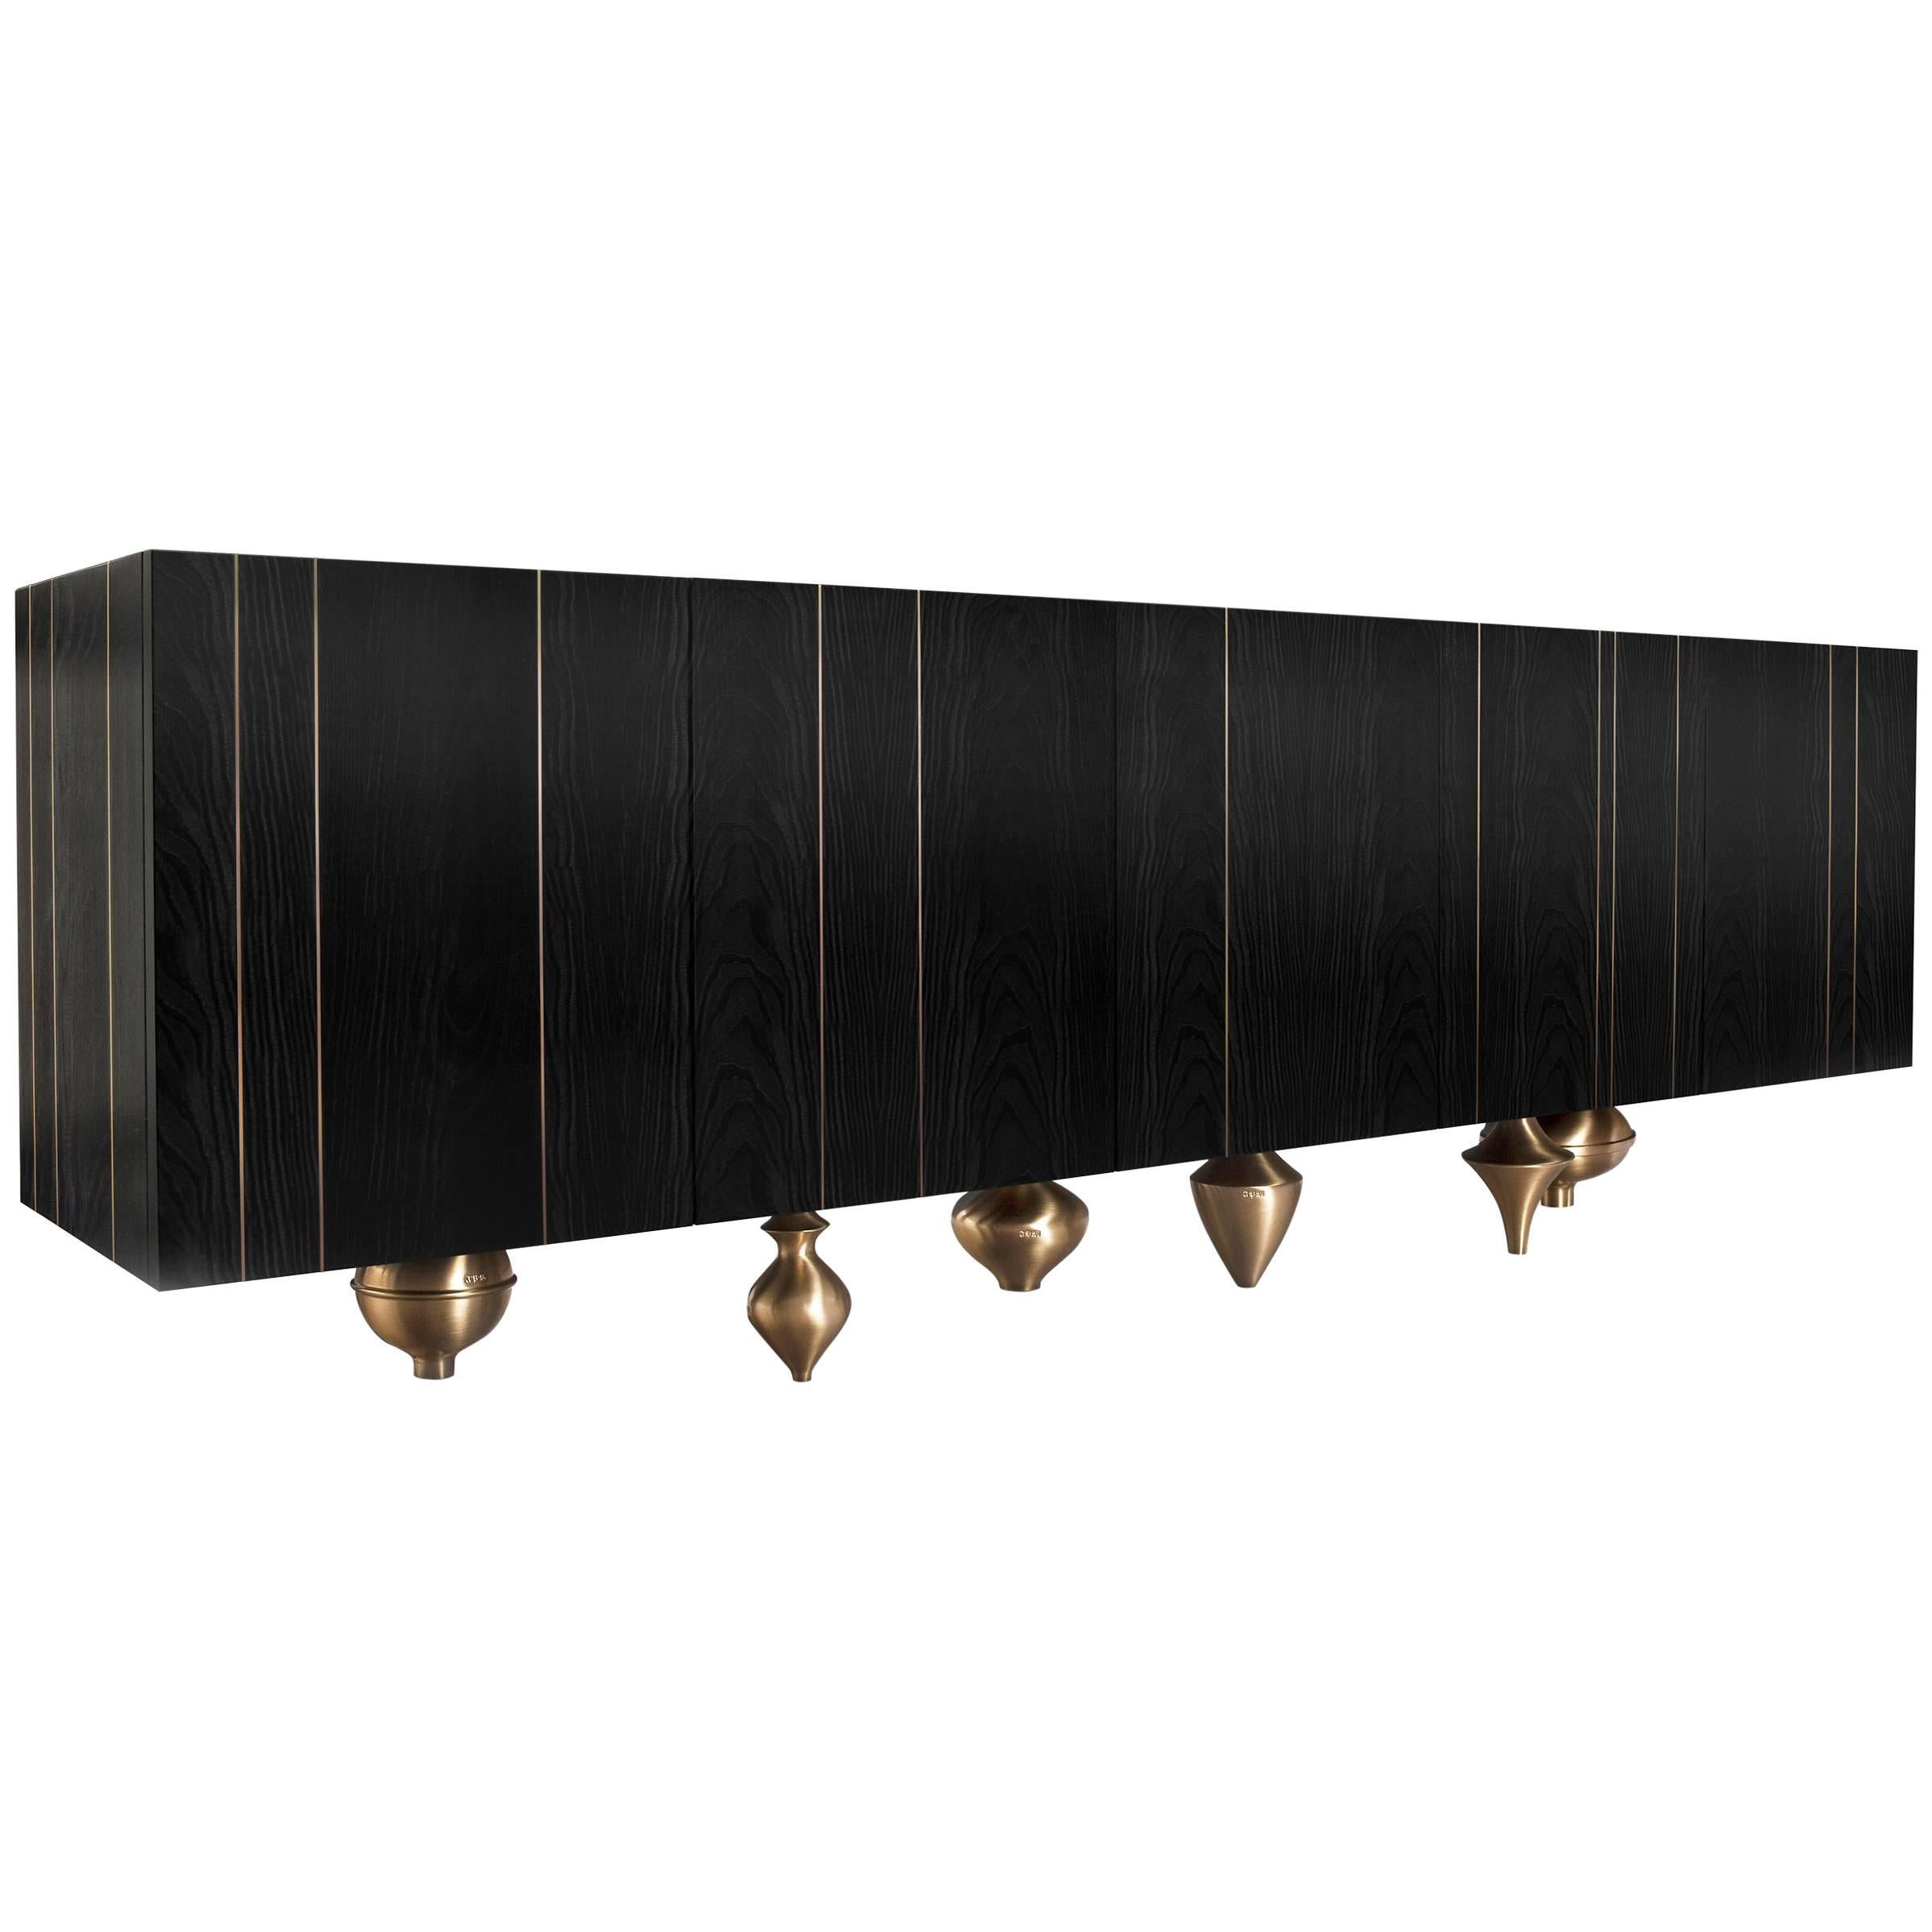 "Il Pezzo 1 Black Credenza" Modern Black Stained Ash Sideboard with Bronze Base